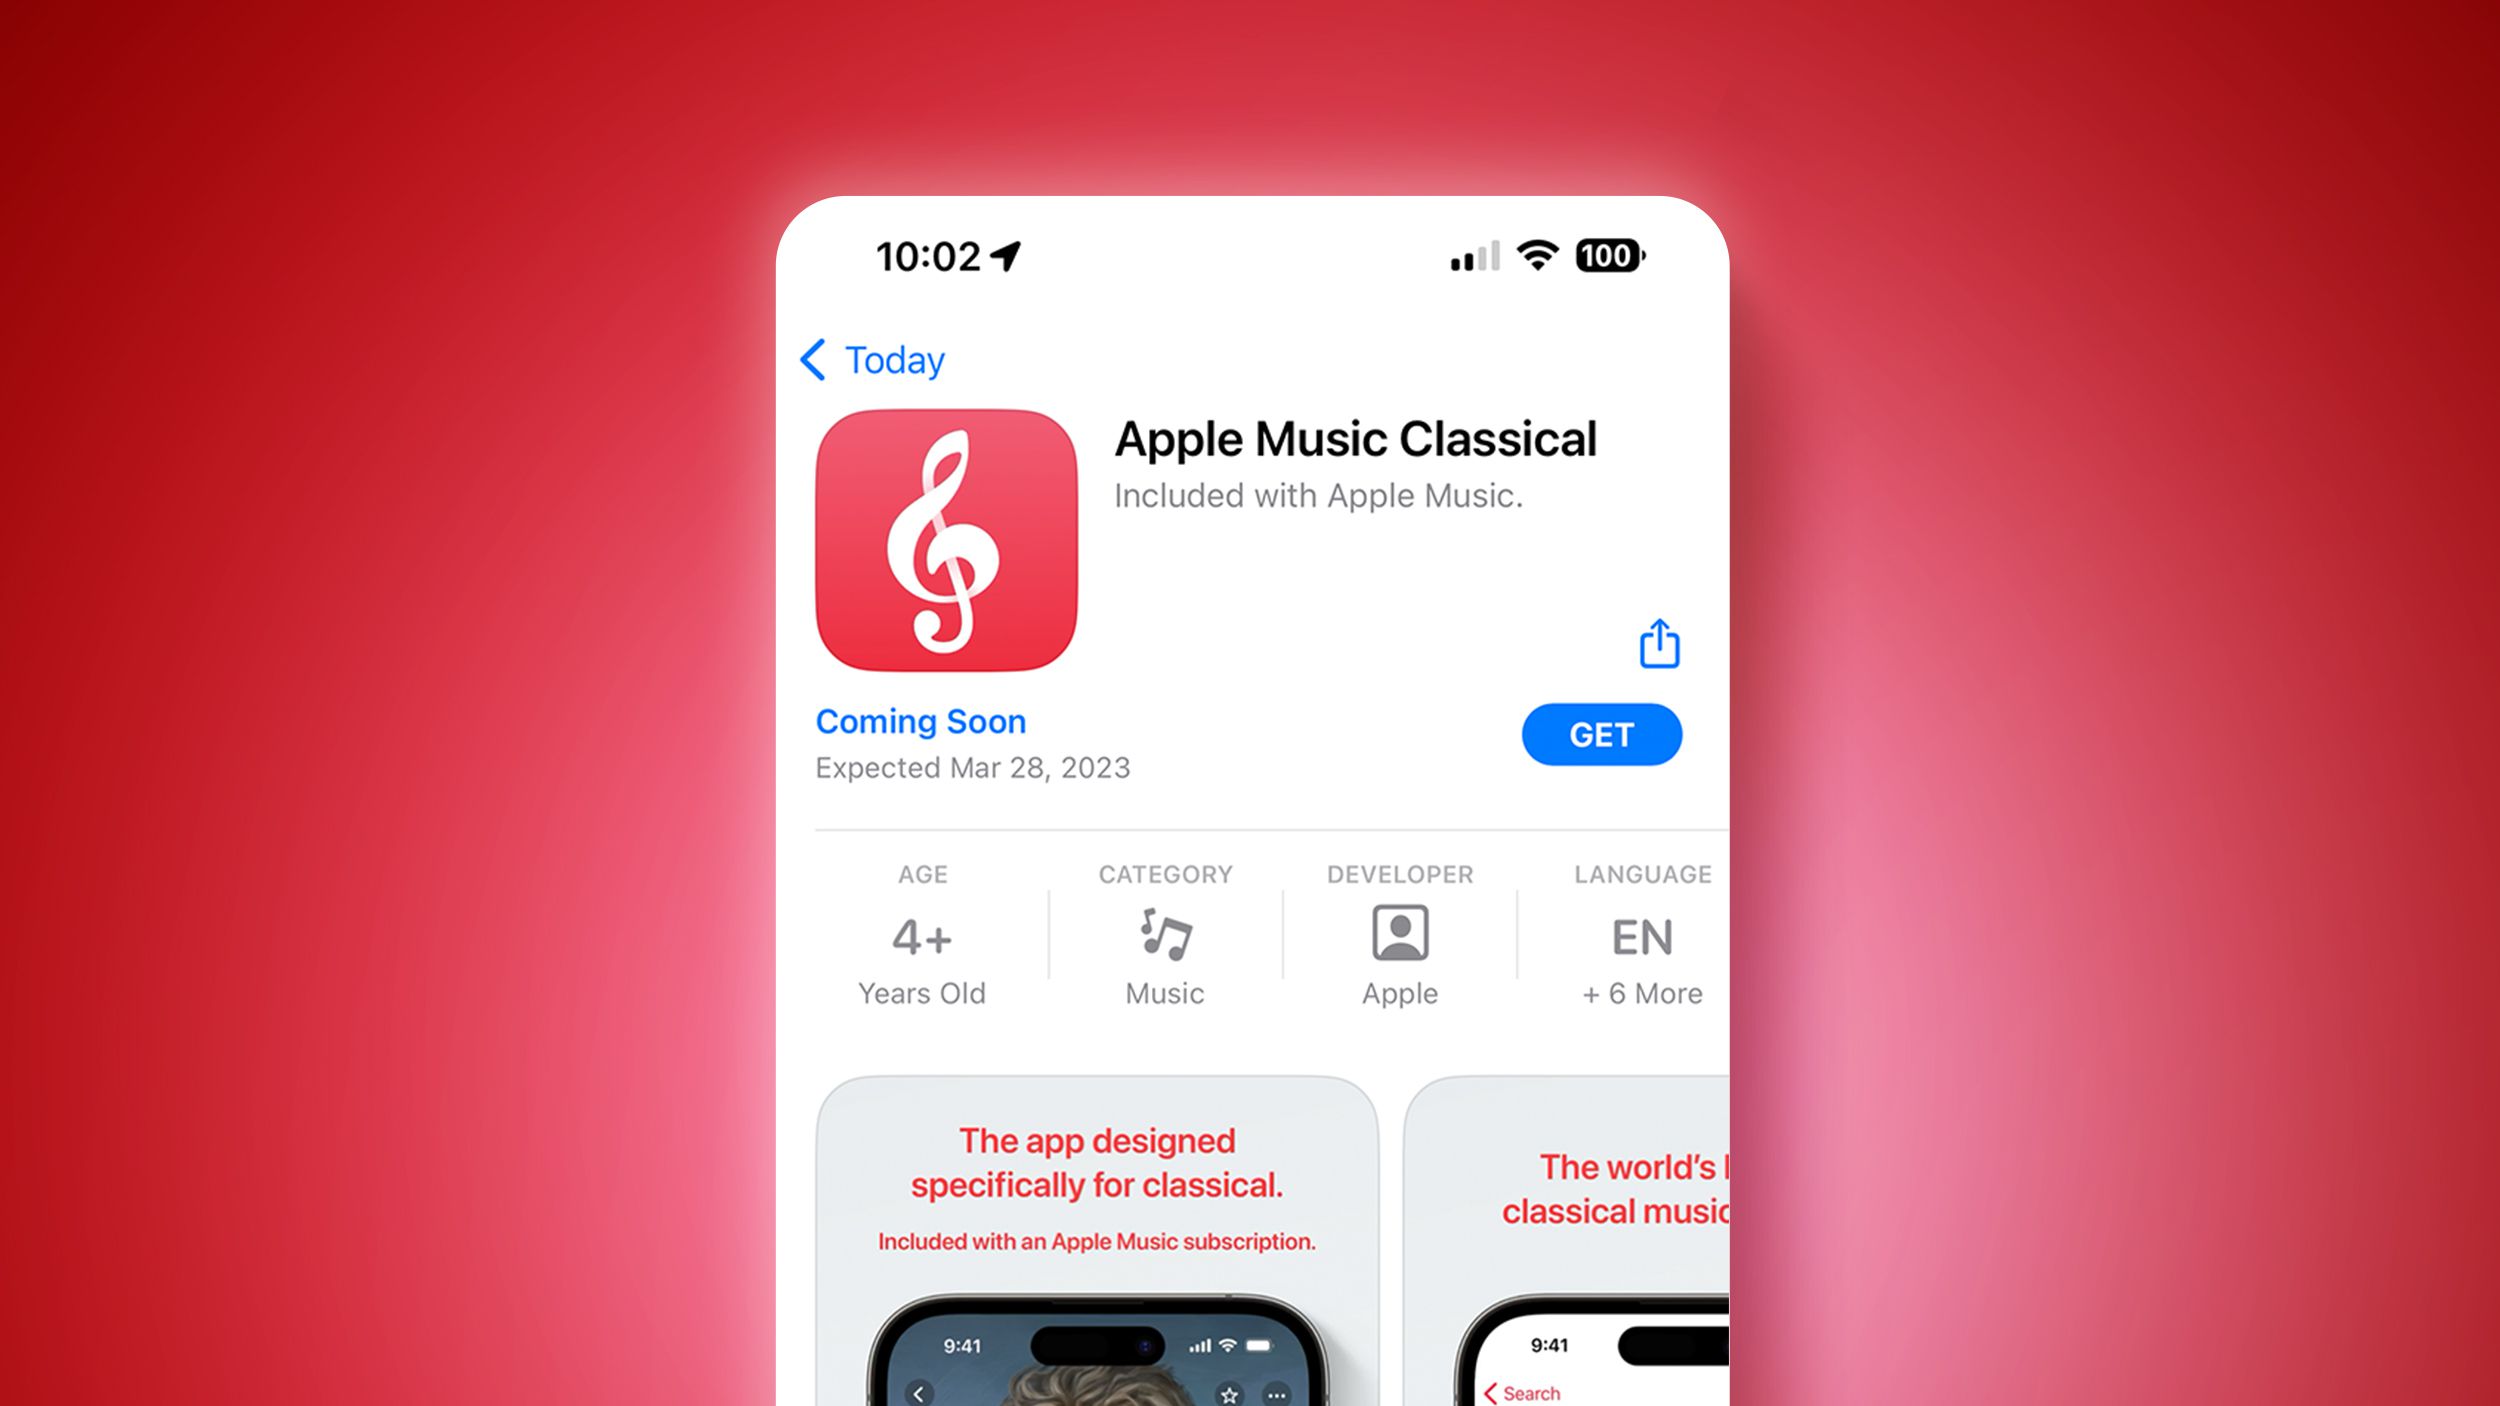 Apple Music Classical Begins Launching for Some iPhone Users